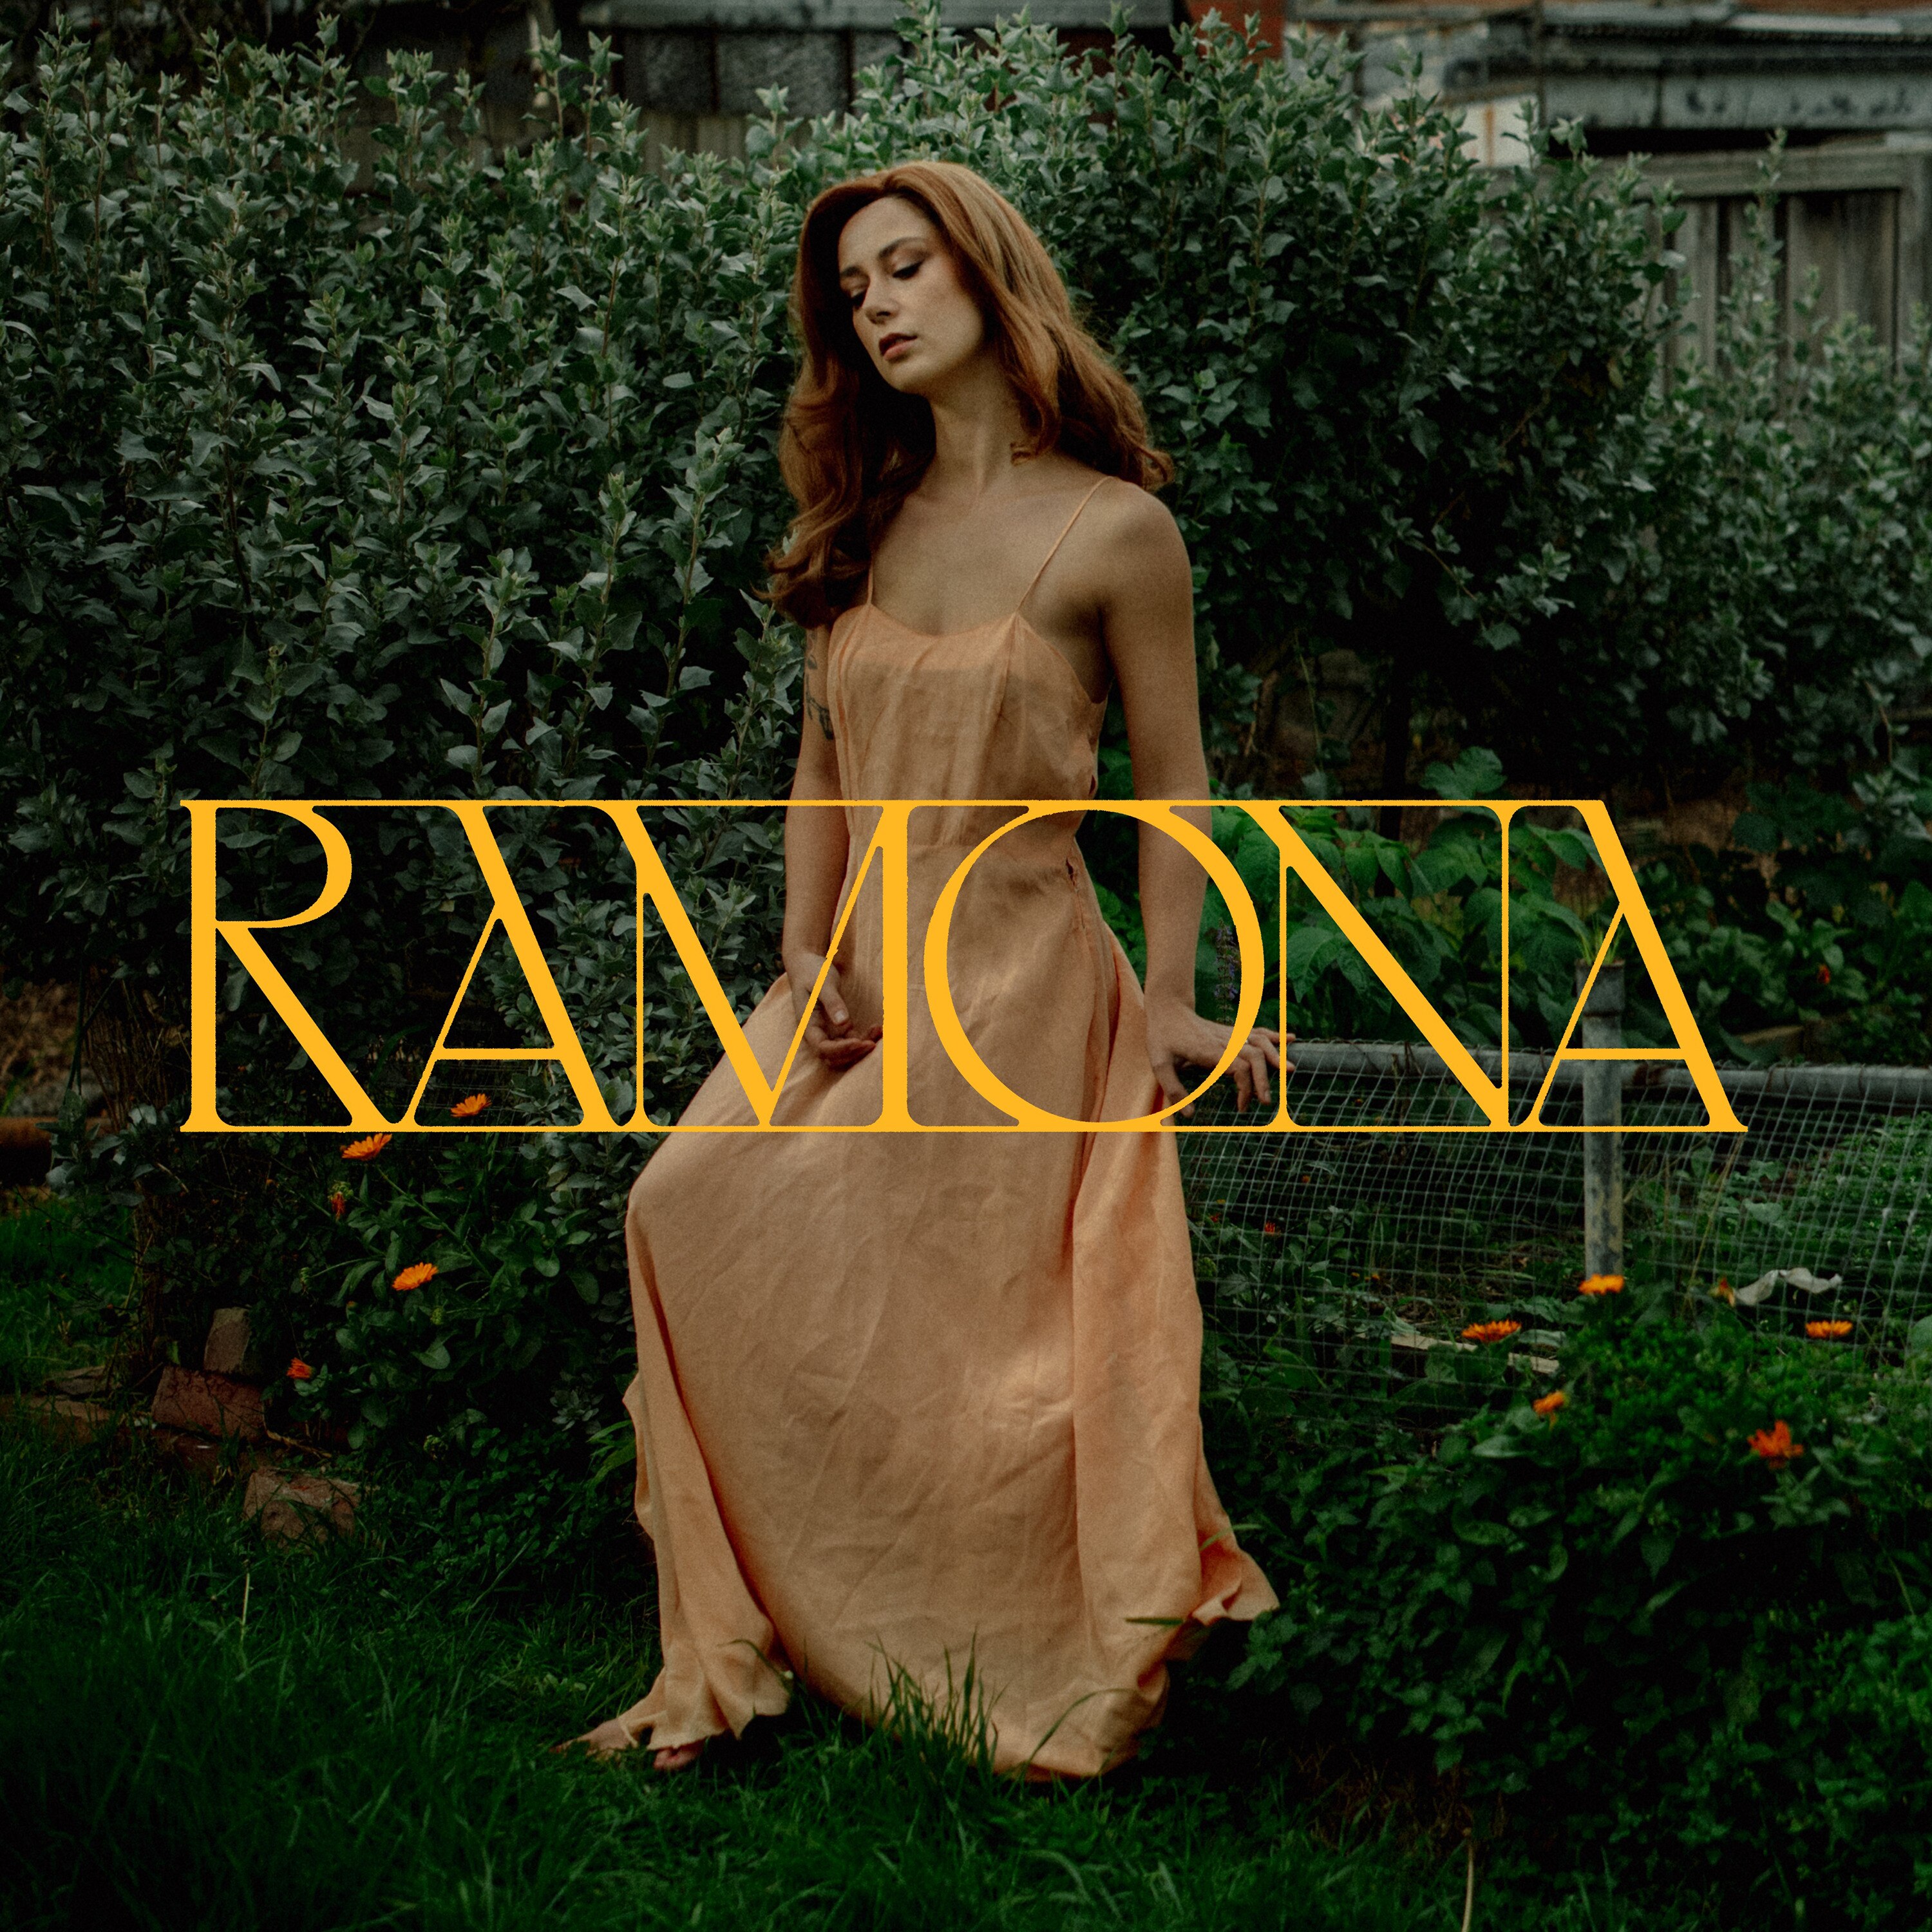 Brunette woman stands in tan cloth-gown by hedge & low-fenced garden fence with text: RAMONA